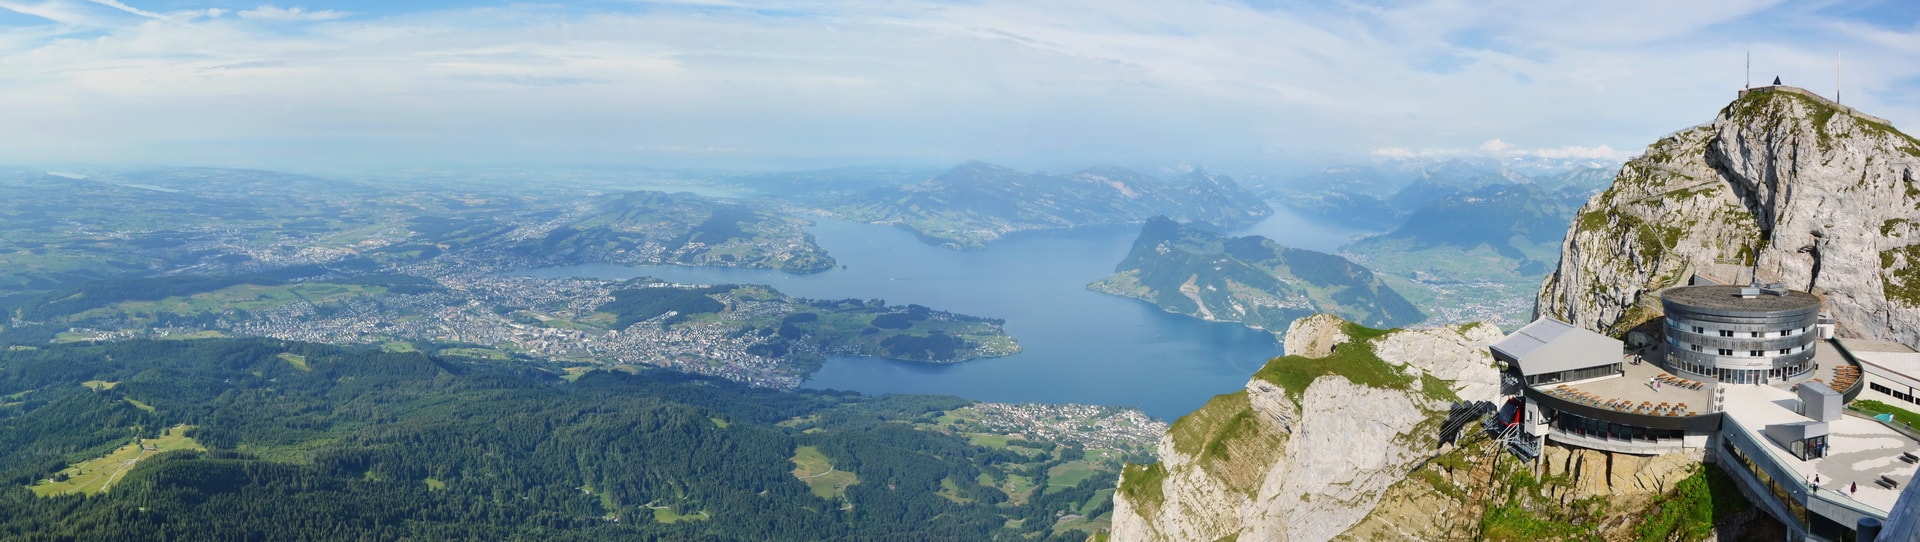 Lake Lucerne and the City of Lucerne